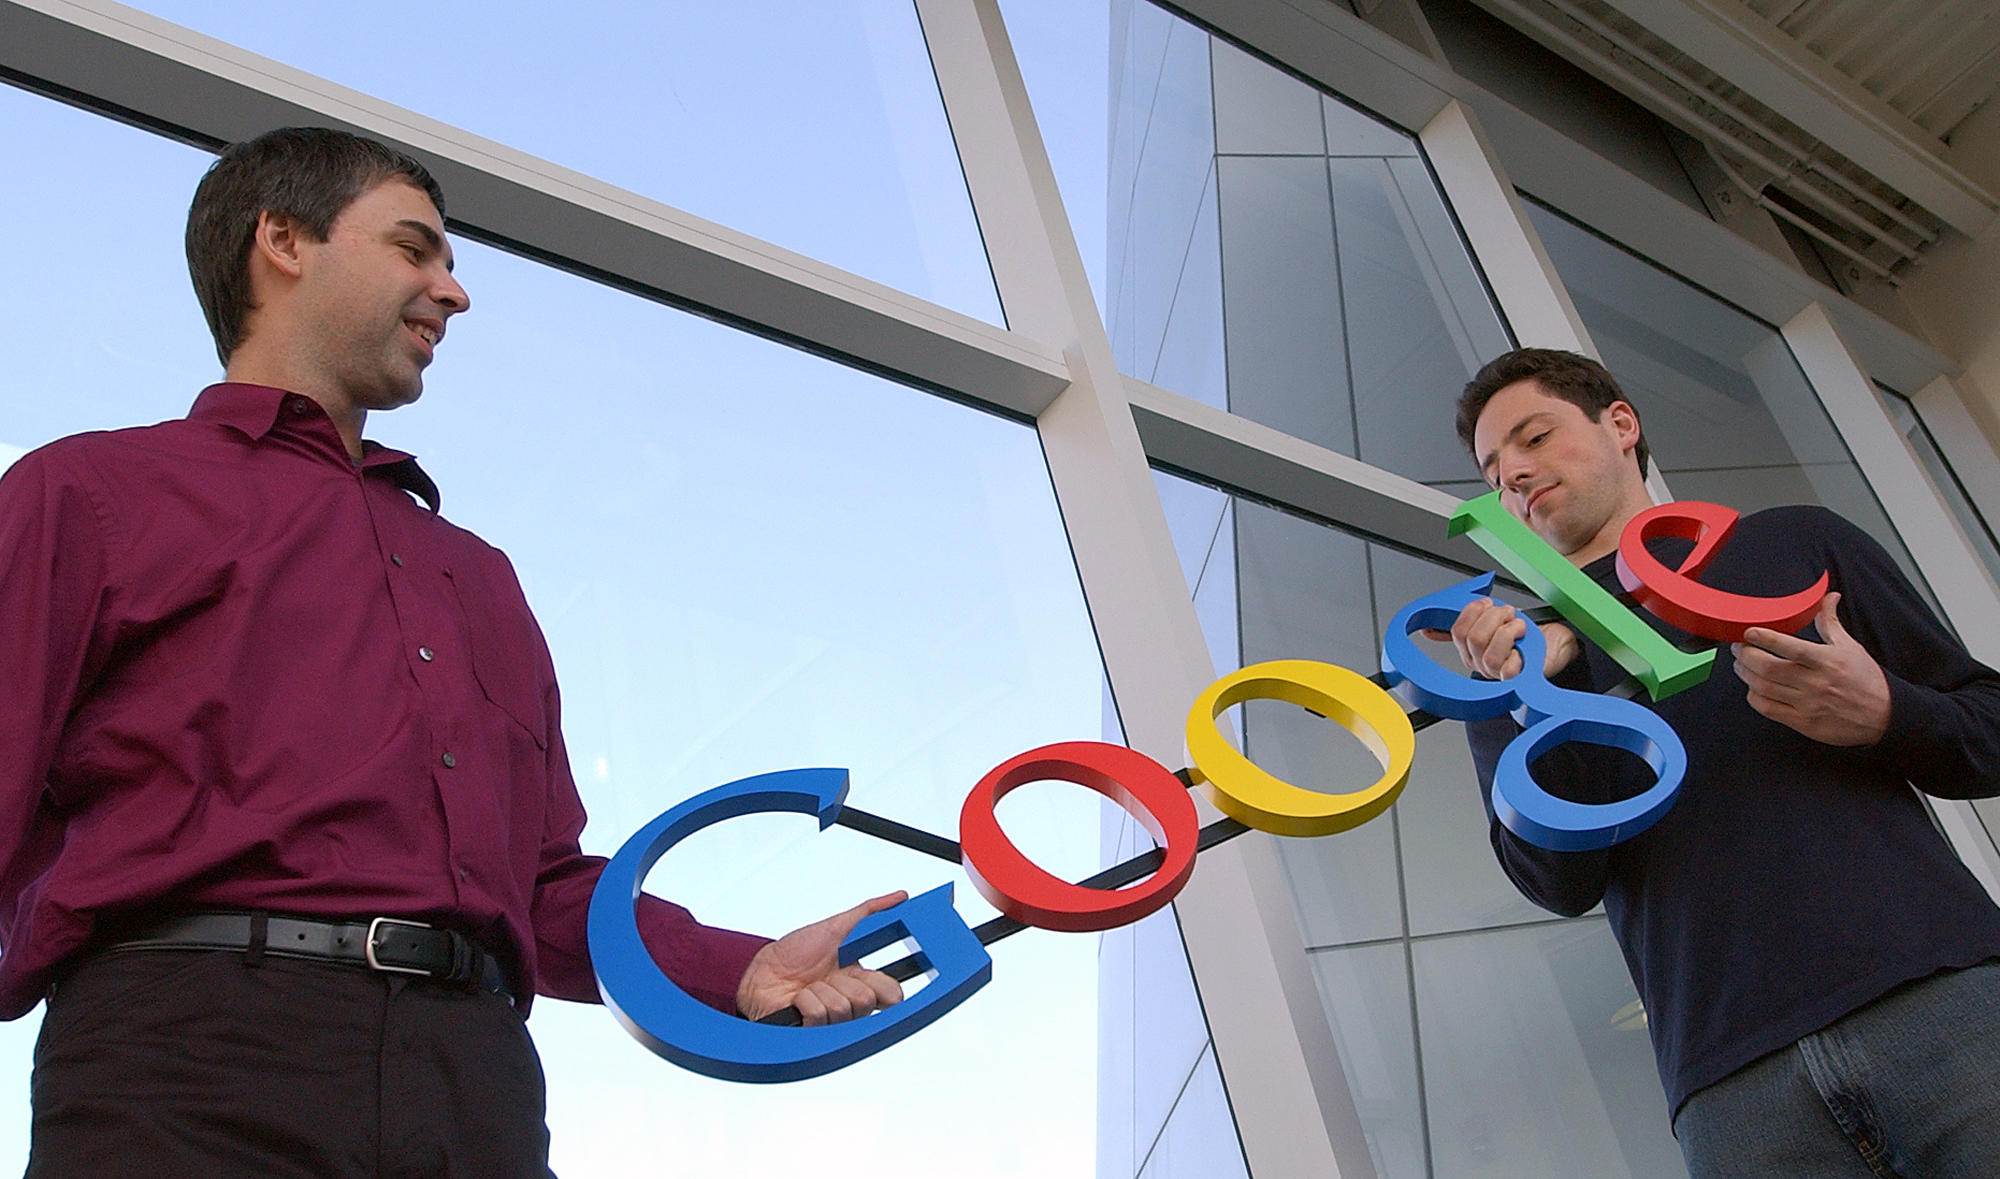 Google co-founders Larry Page, left, and Sergey Brin at their company's headquarters on Jan. 15, 2004.
